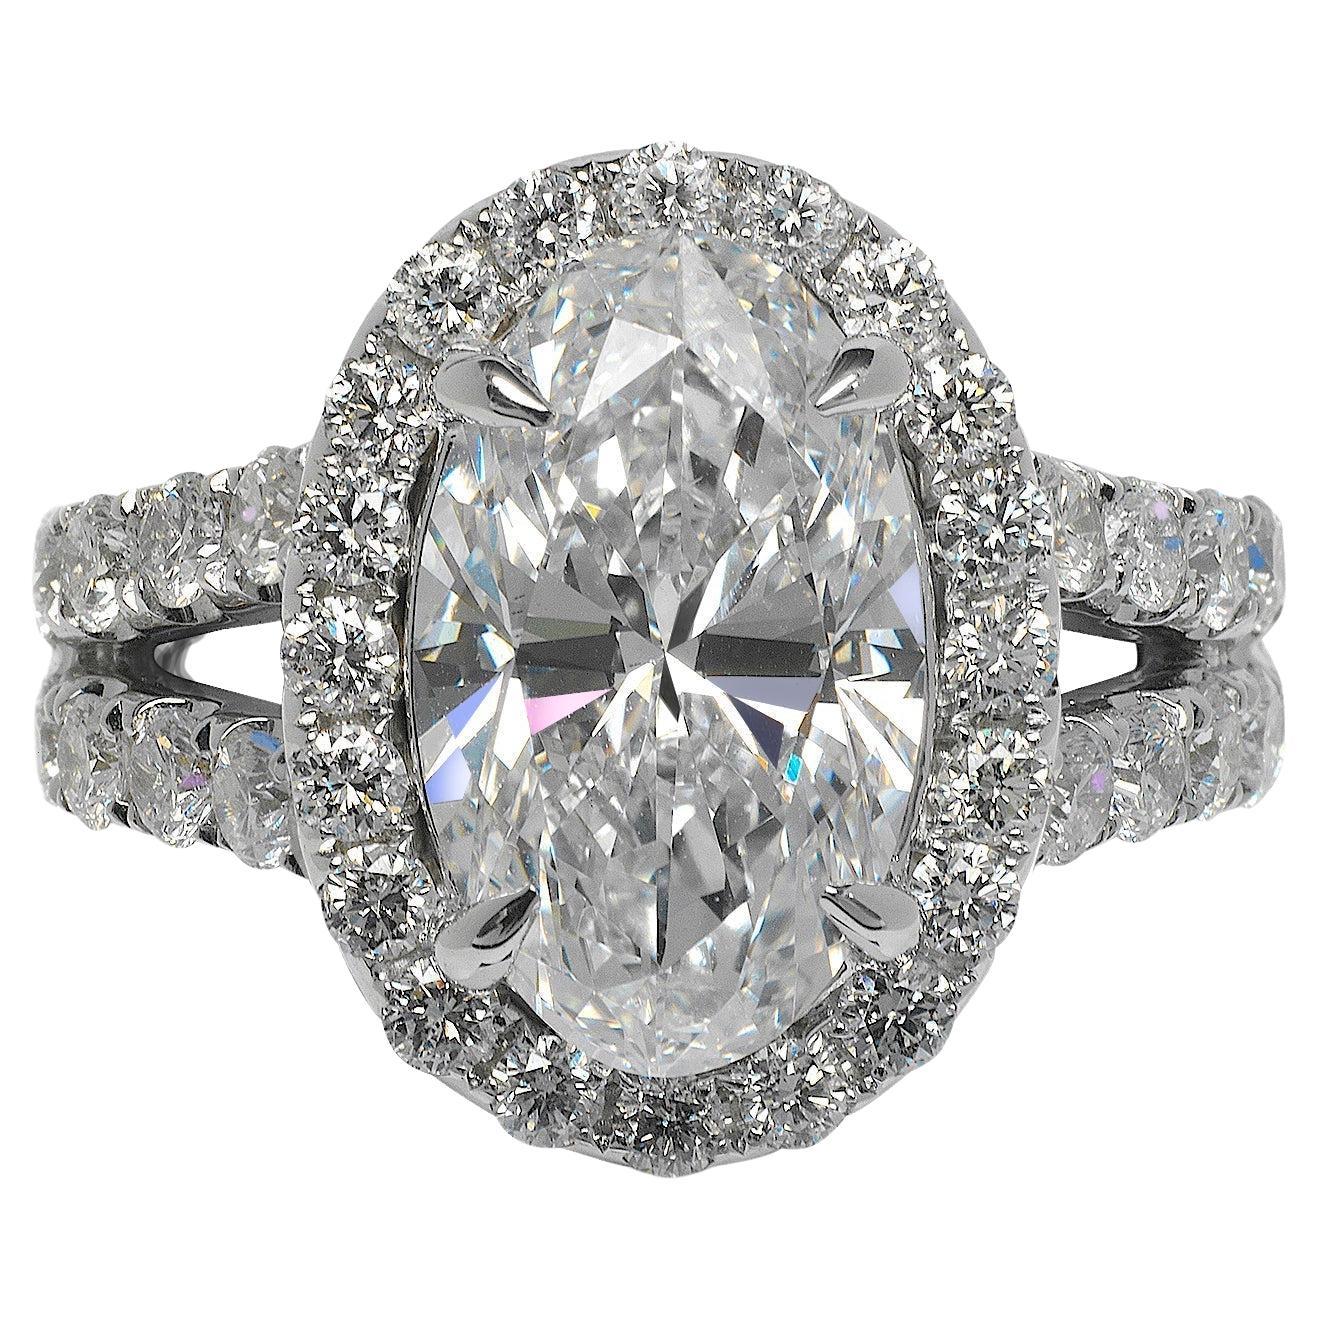 6 Carat Oval Cut Diamond Engagement Ring GIA Certified D VS1 For Sale